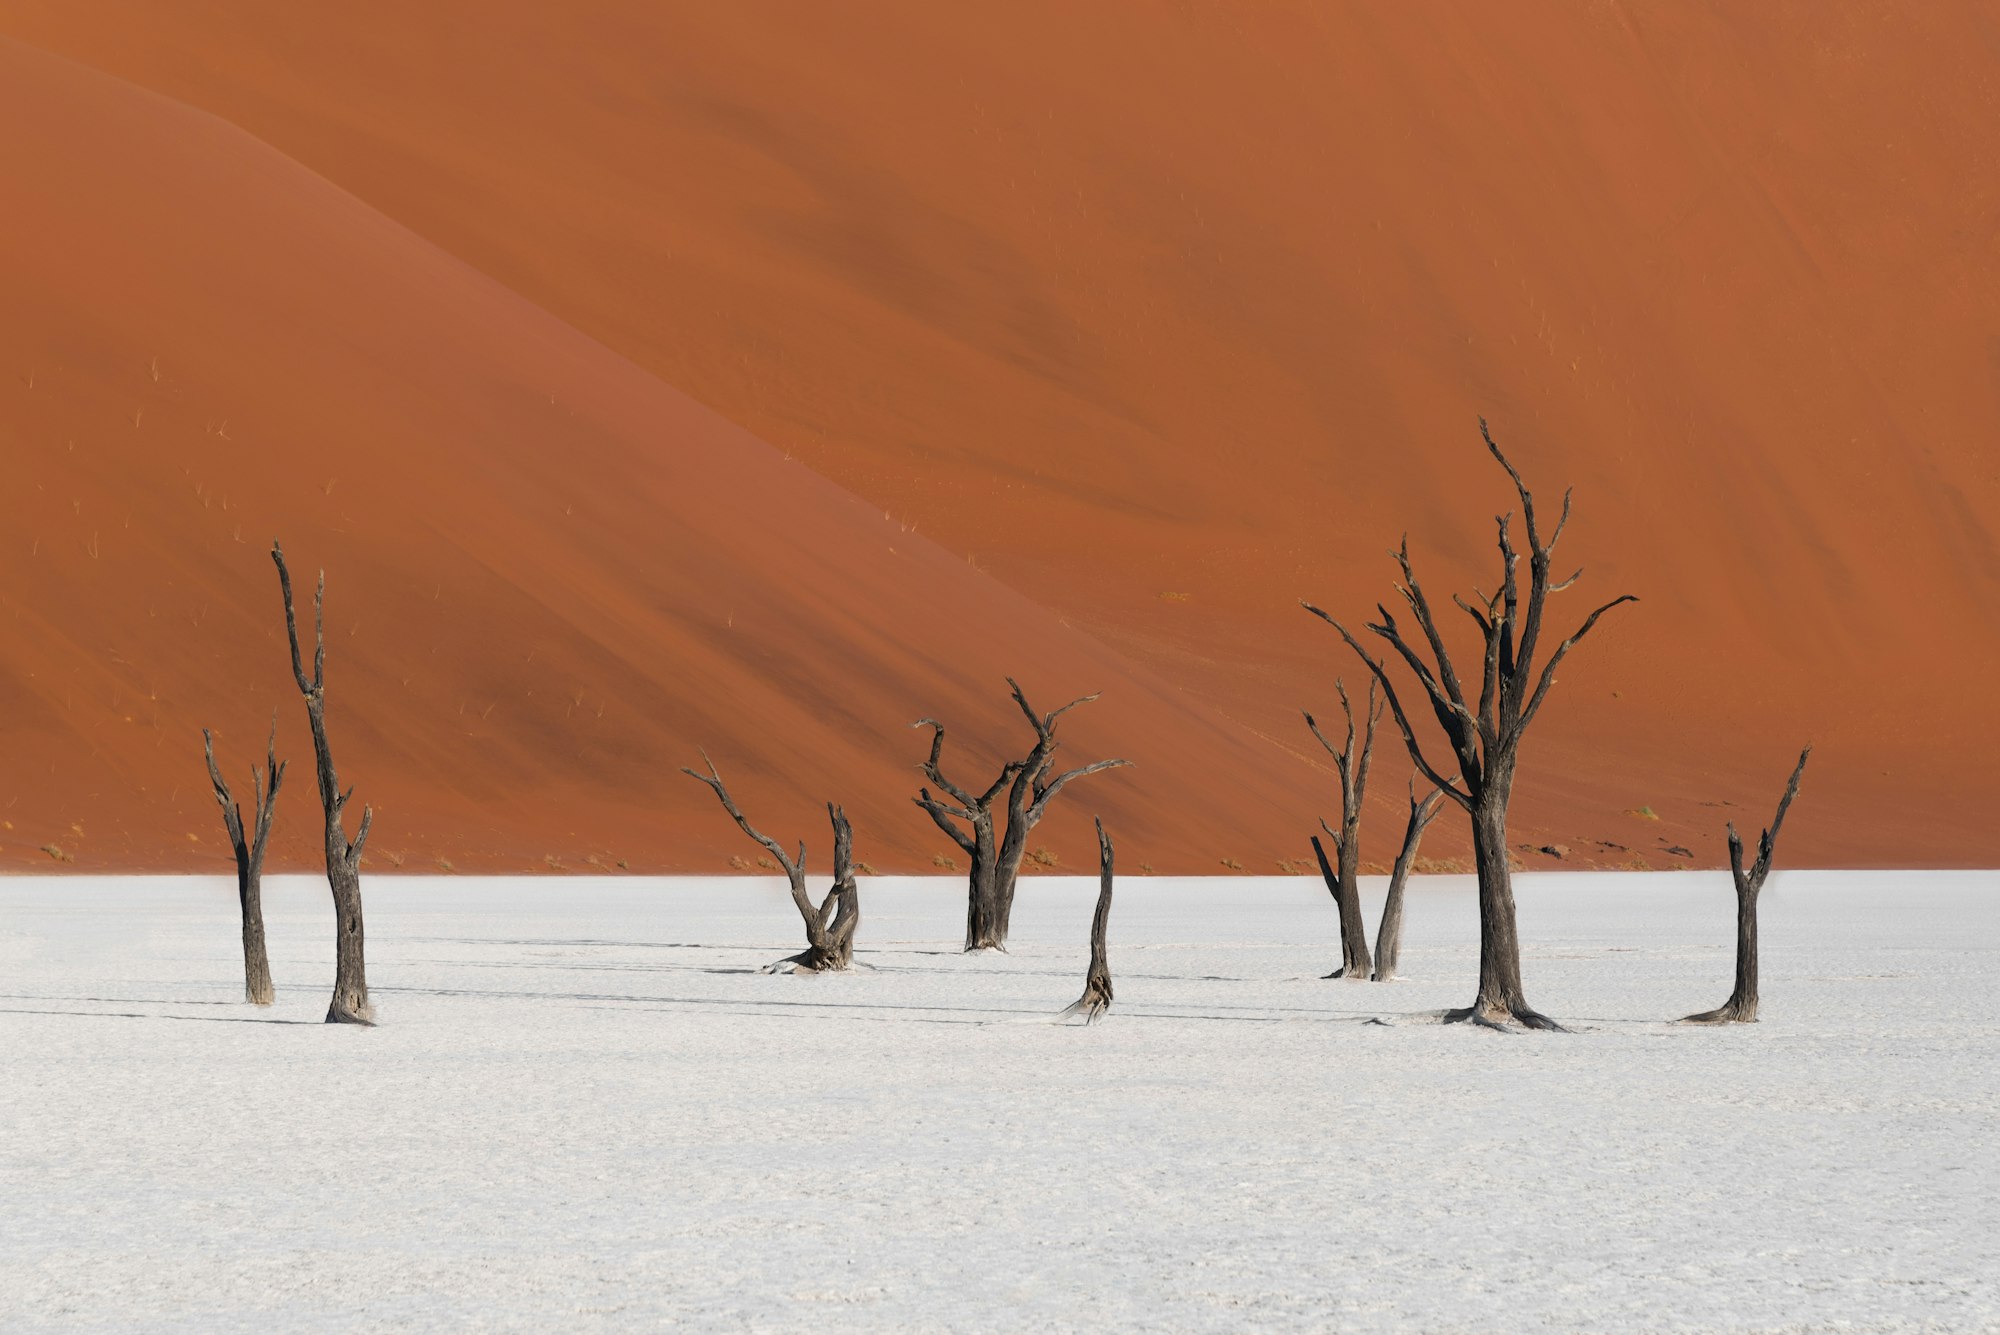 Ancient trees in Deadvlei